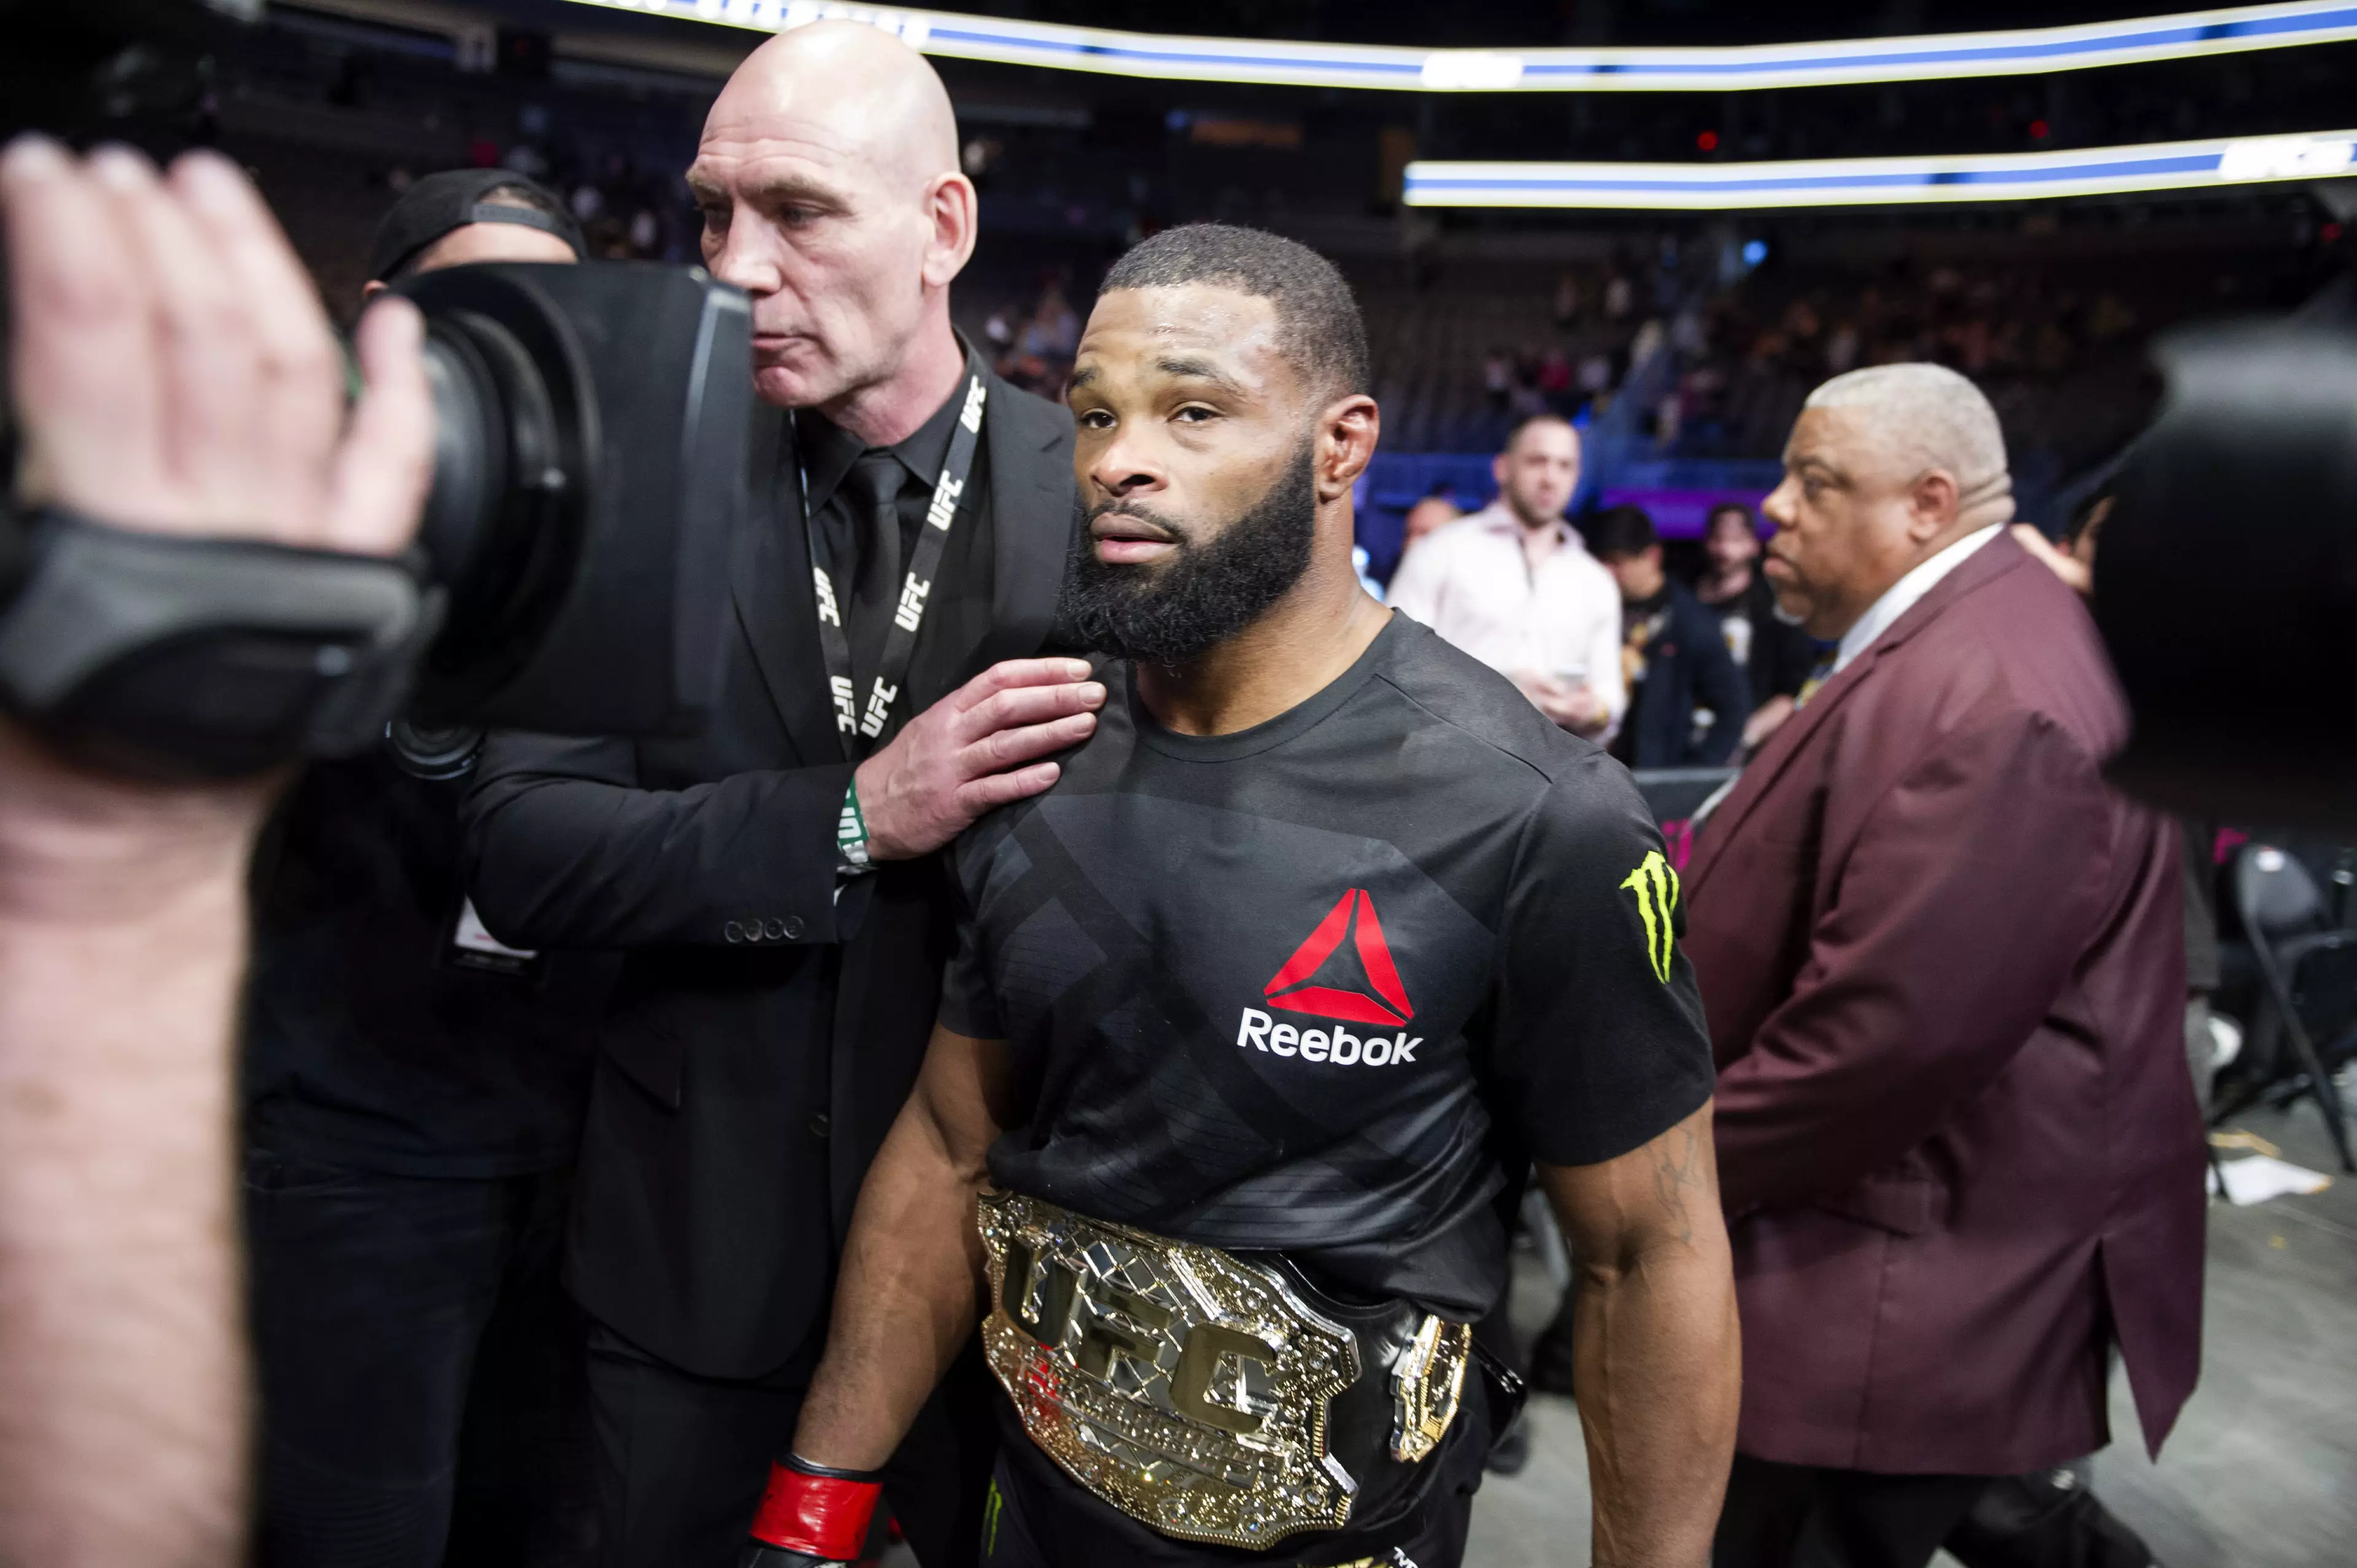 Tyron Woodley is a decorated UFC champion